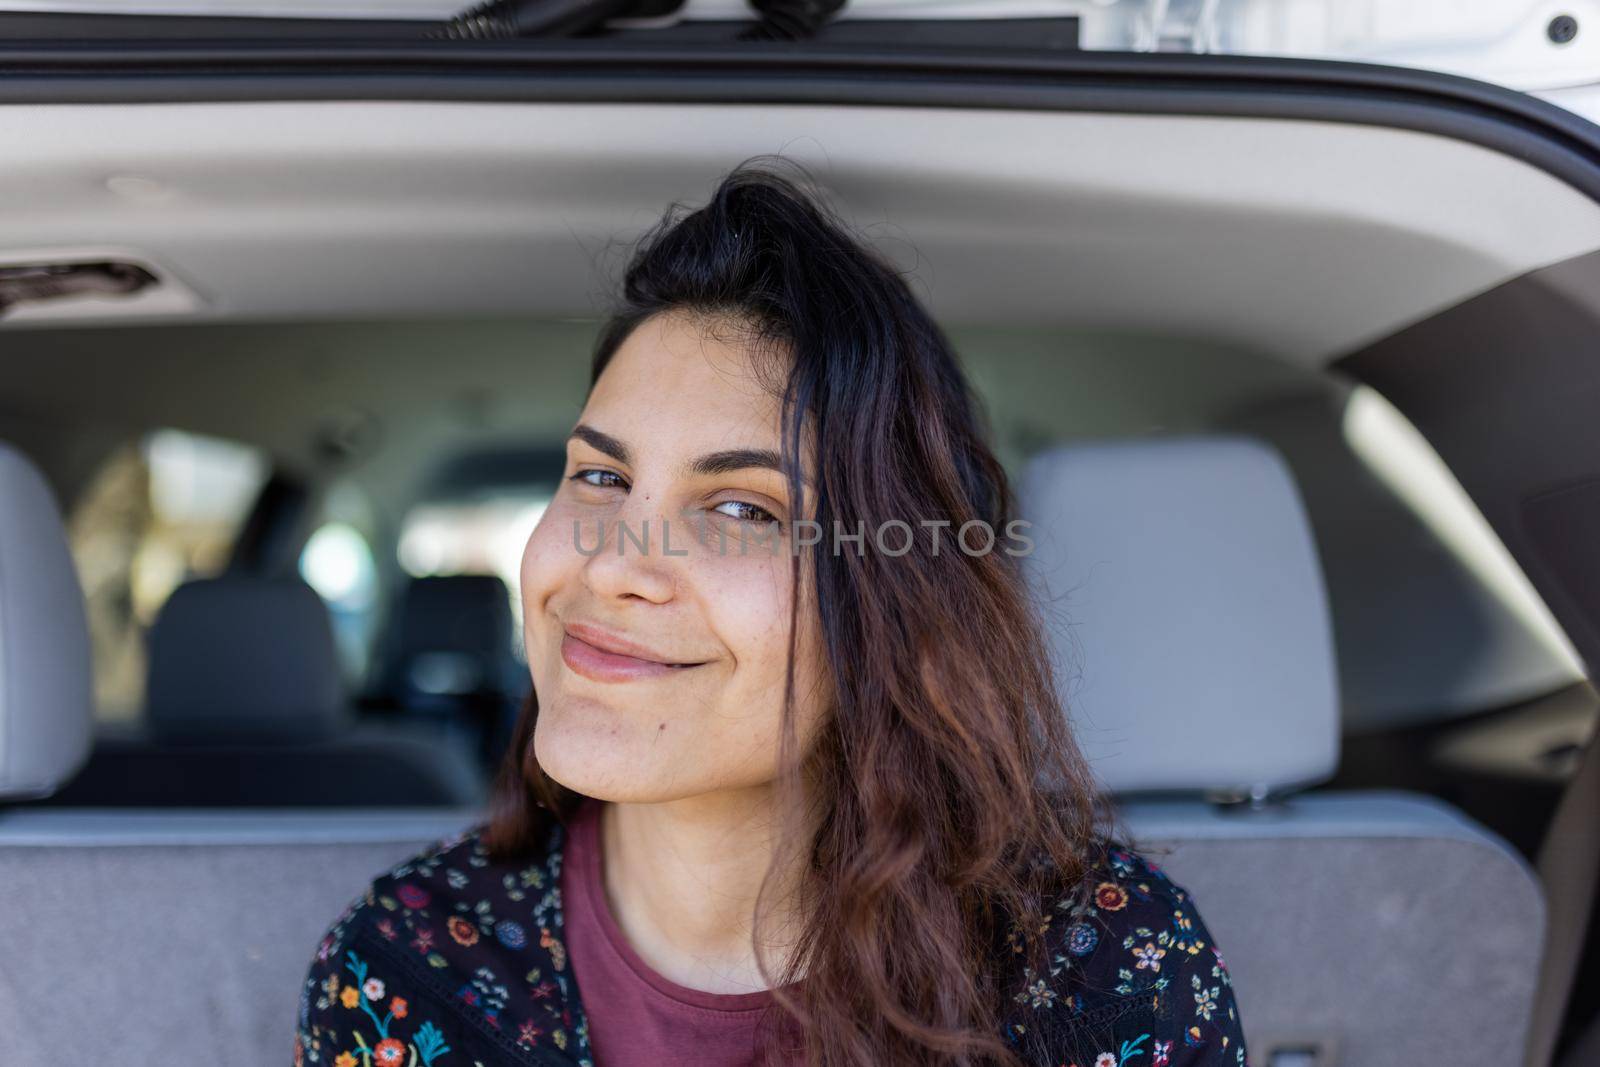 Close-up of beautiful brunette woman smiling in the back of SUV. Portrait of happy woman with wavy hair and the interior of a vehicle as background. People and transportation